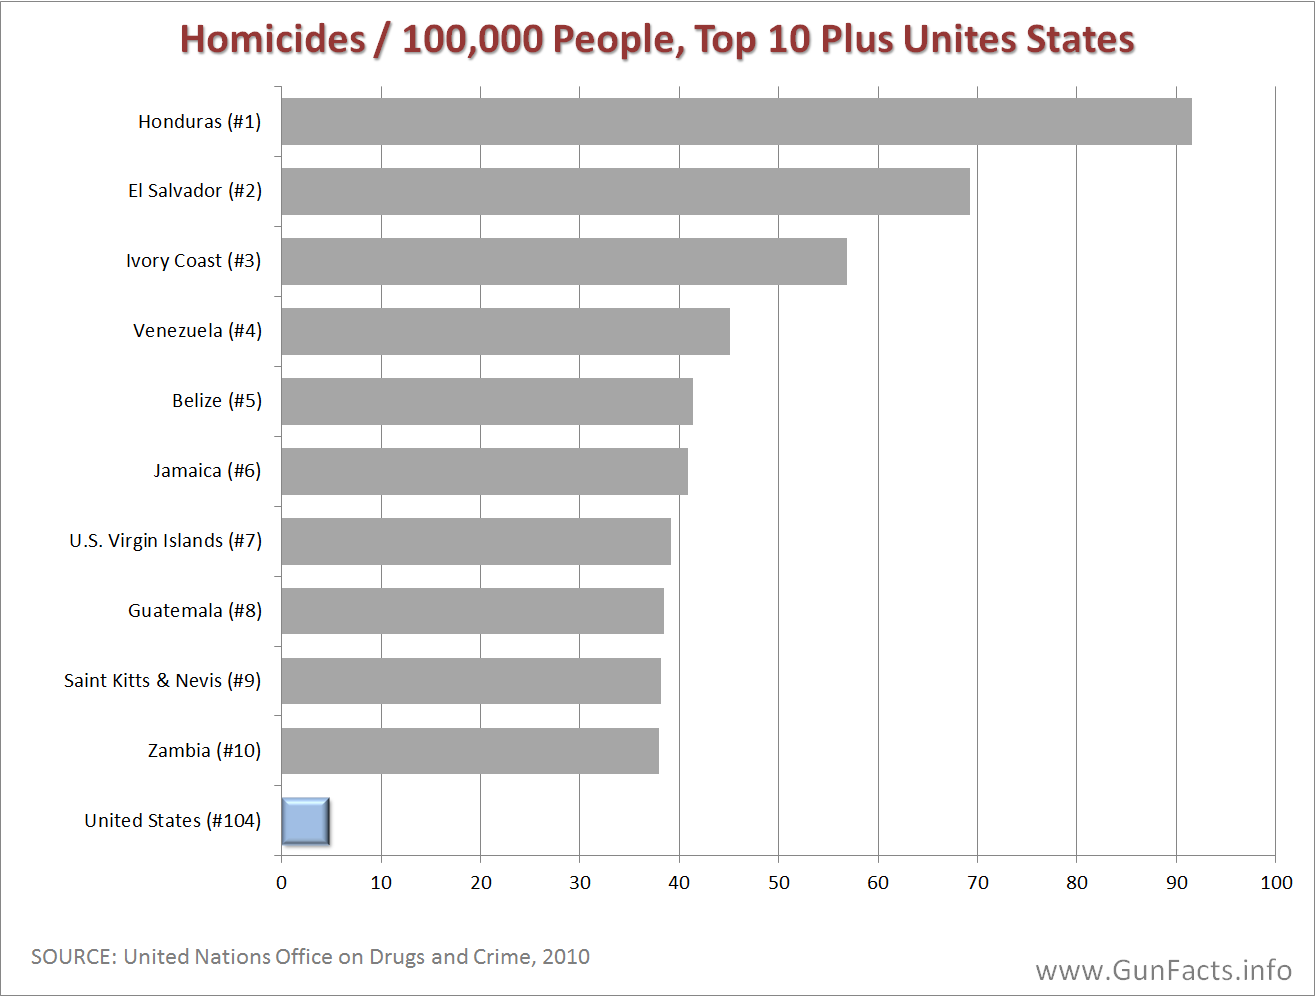 GUNS-IN-OTHER-COUNTRIES-Homicide-Rates-for-Top-Ten-Countries-Plus-United-States.png